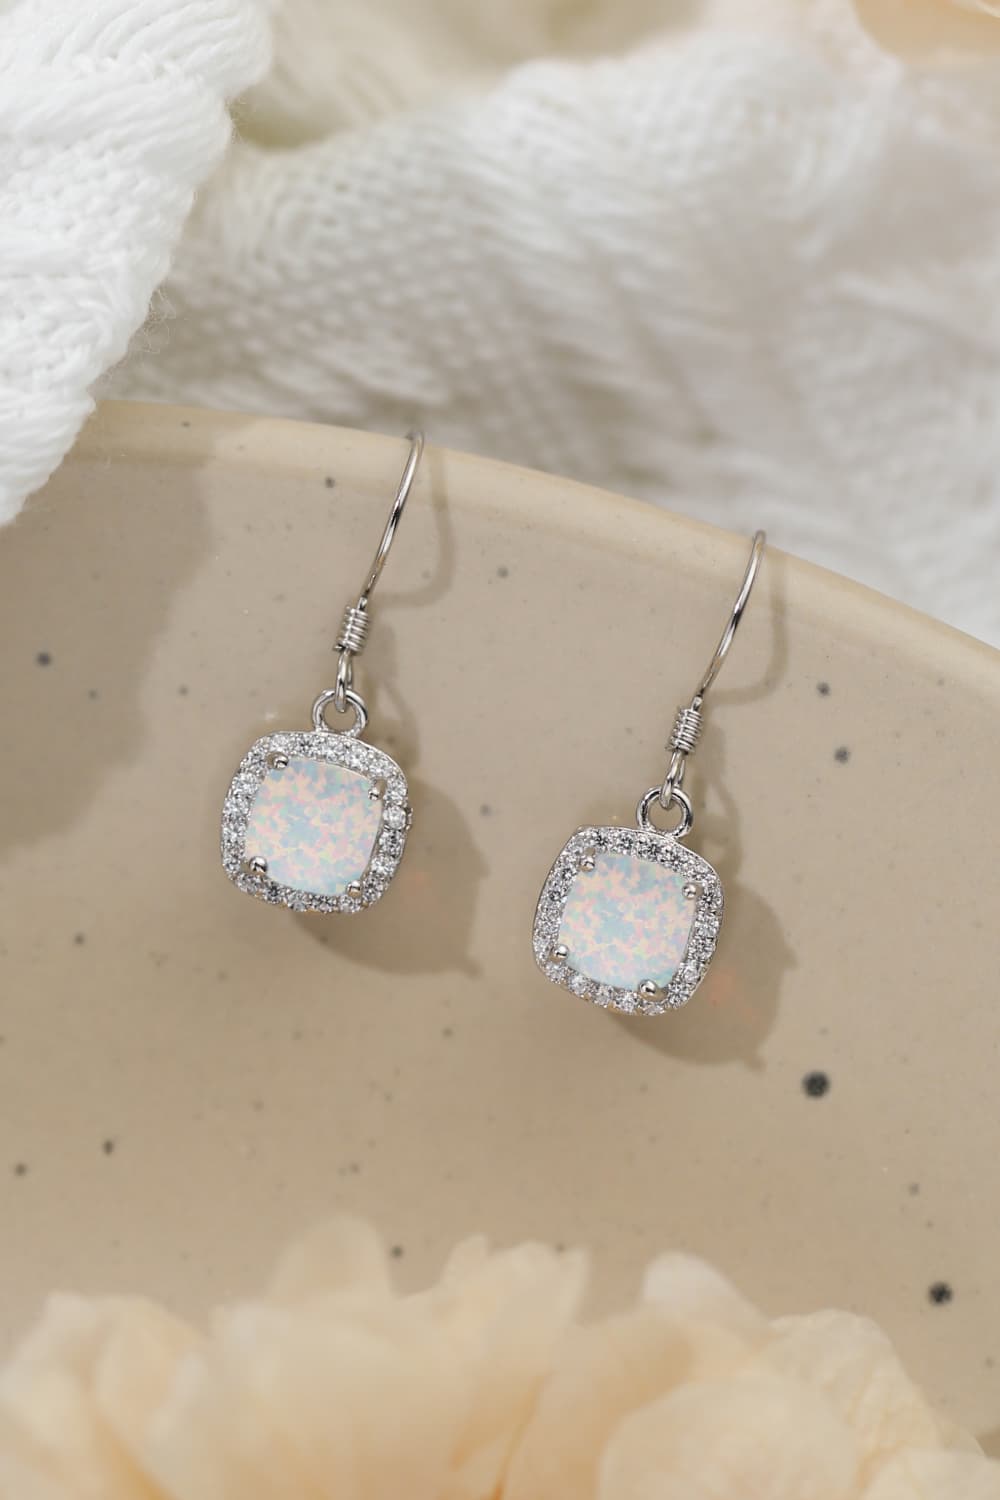 Opal Square Drop Earrings - Tophatter Shopping Deals - Electronics, Jewelry, Auction, App, Bidding, Gadgets, Fashion